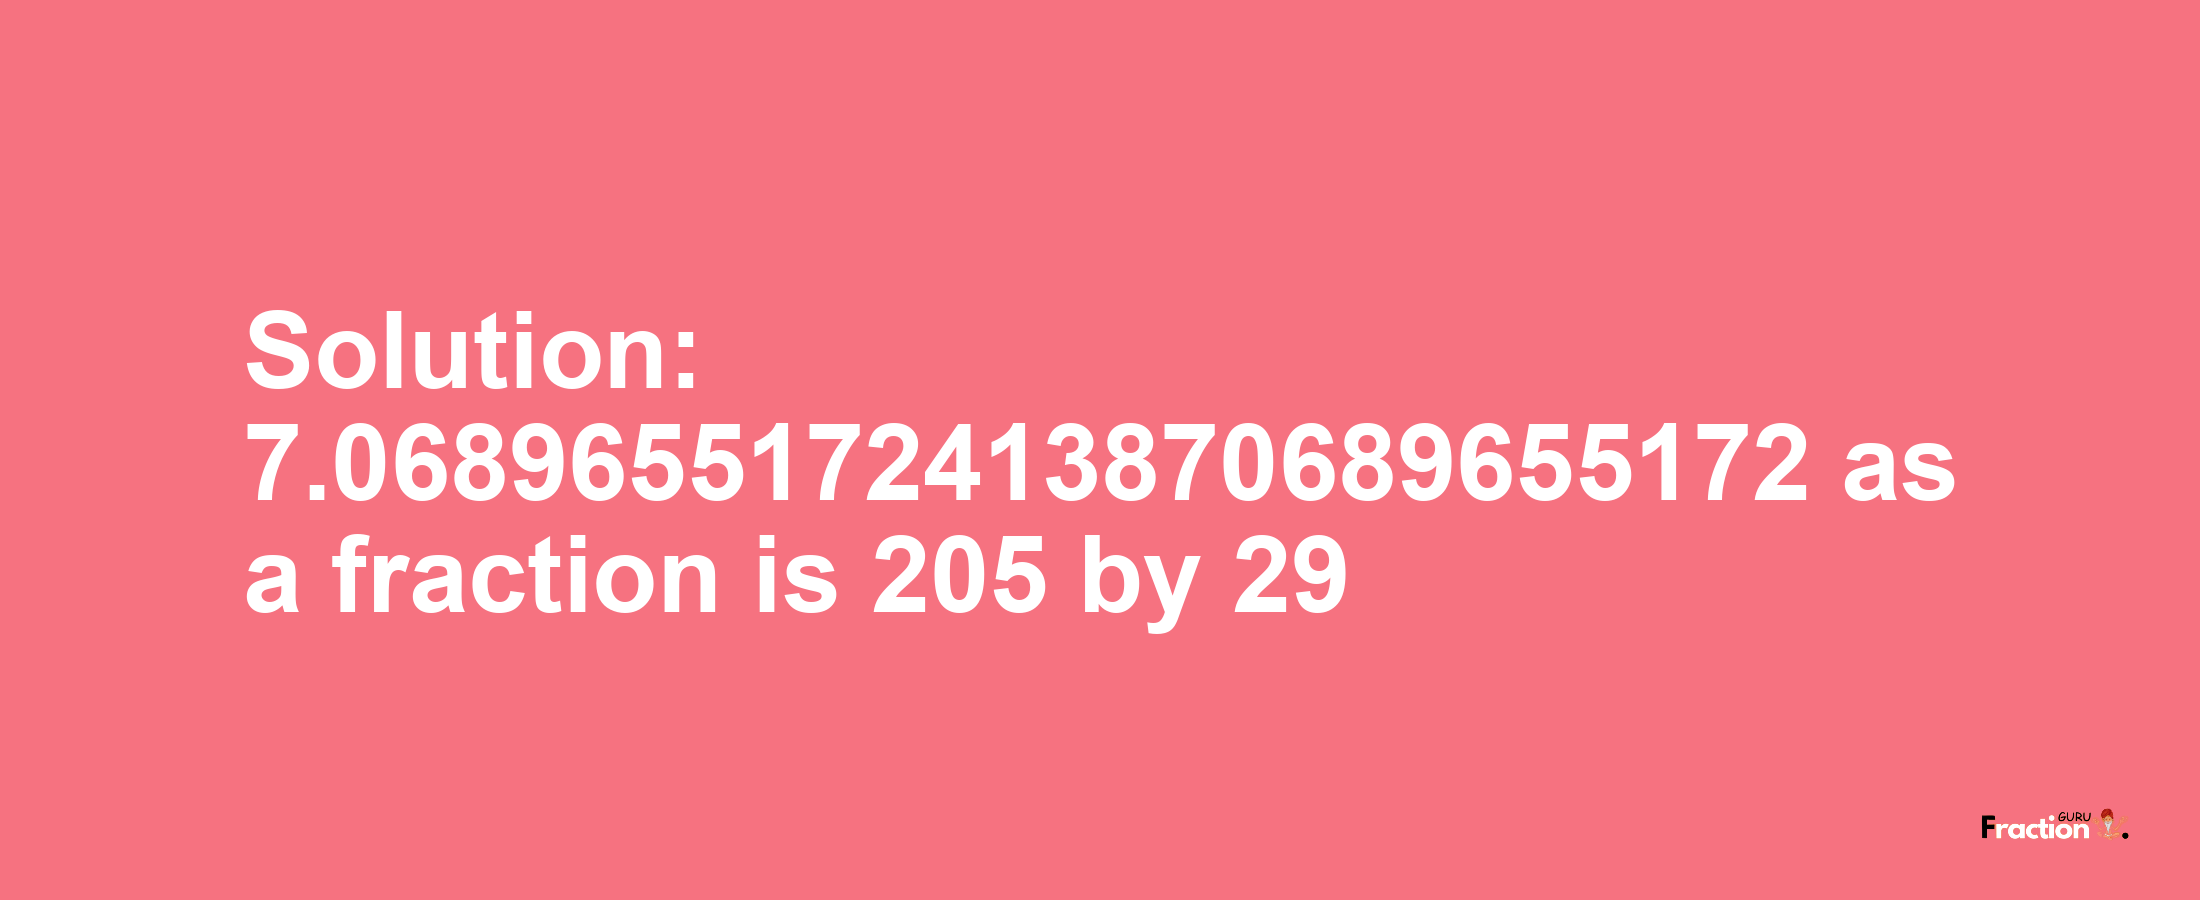 Solution:7.0689655172413870689655172 as a fraction is 205/29